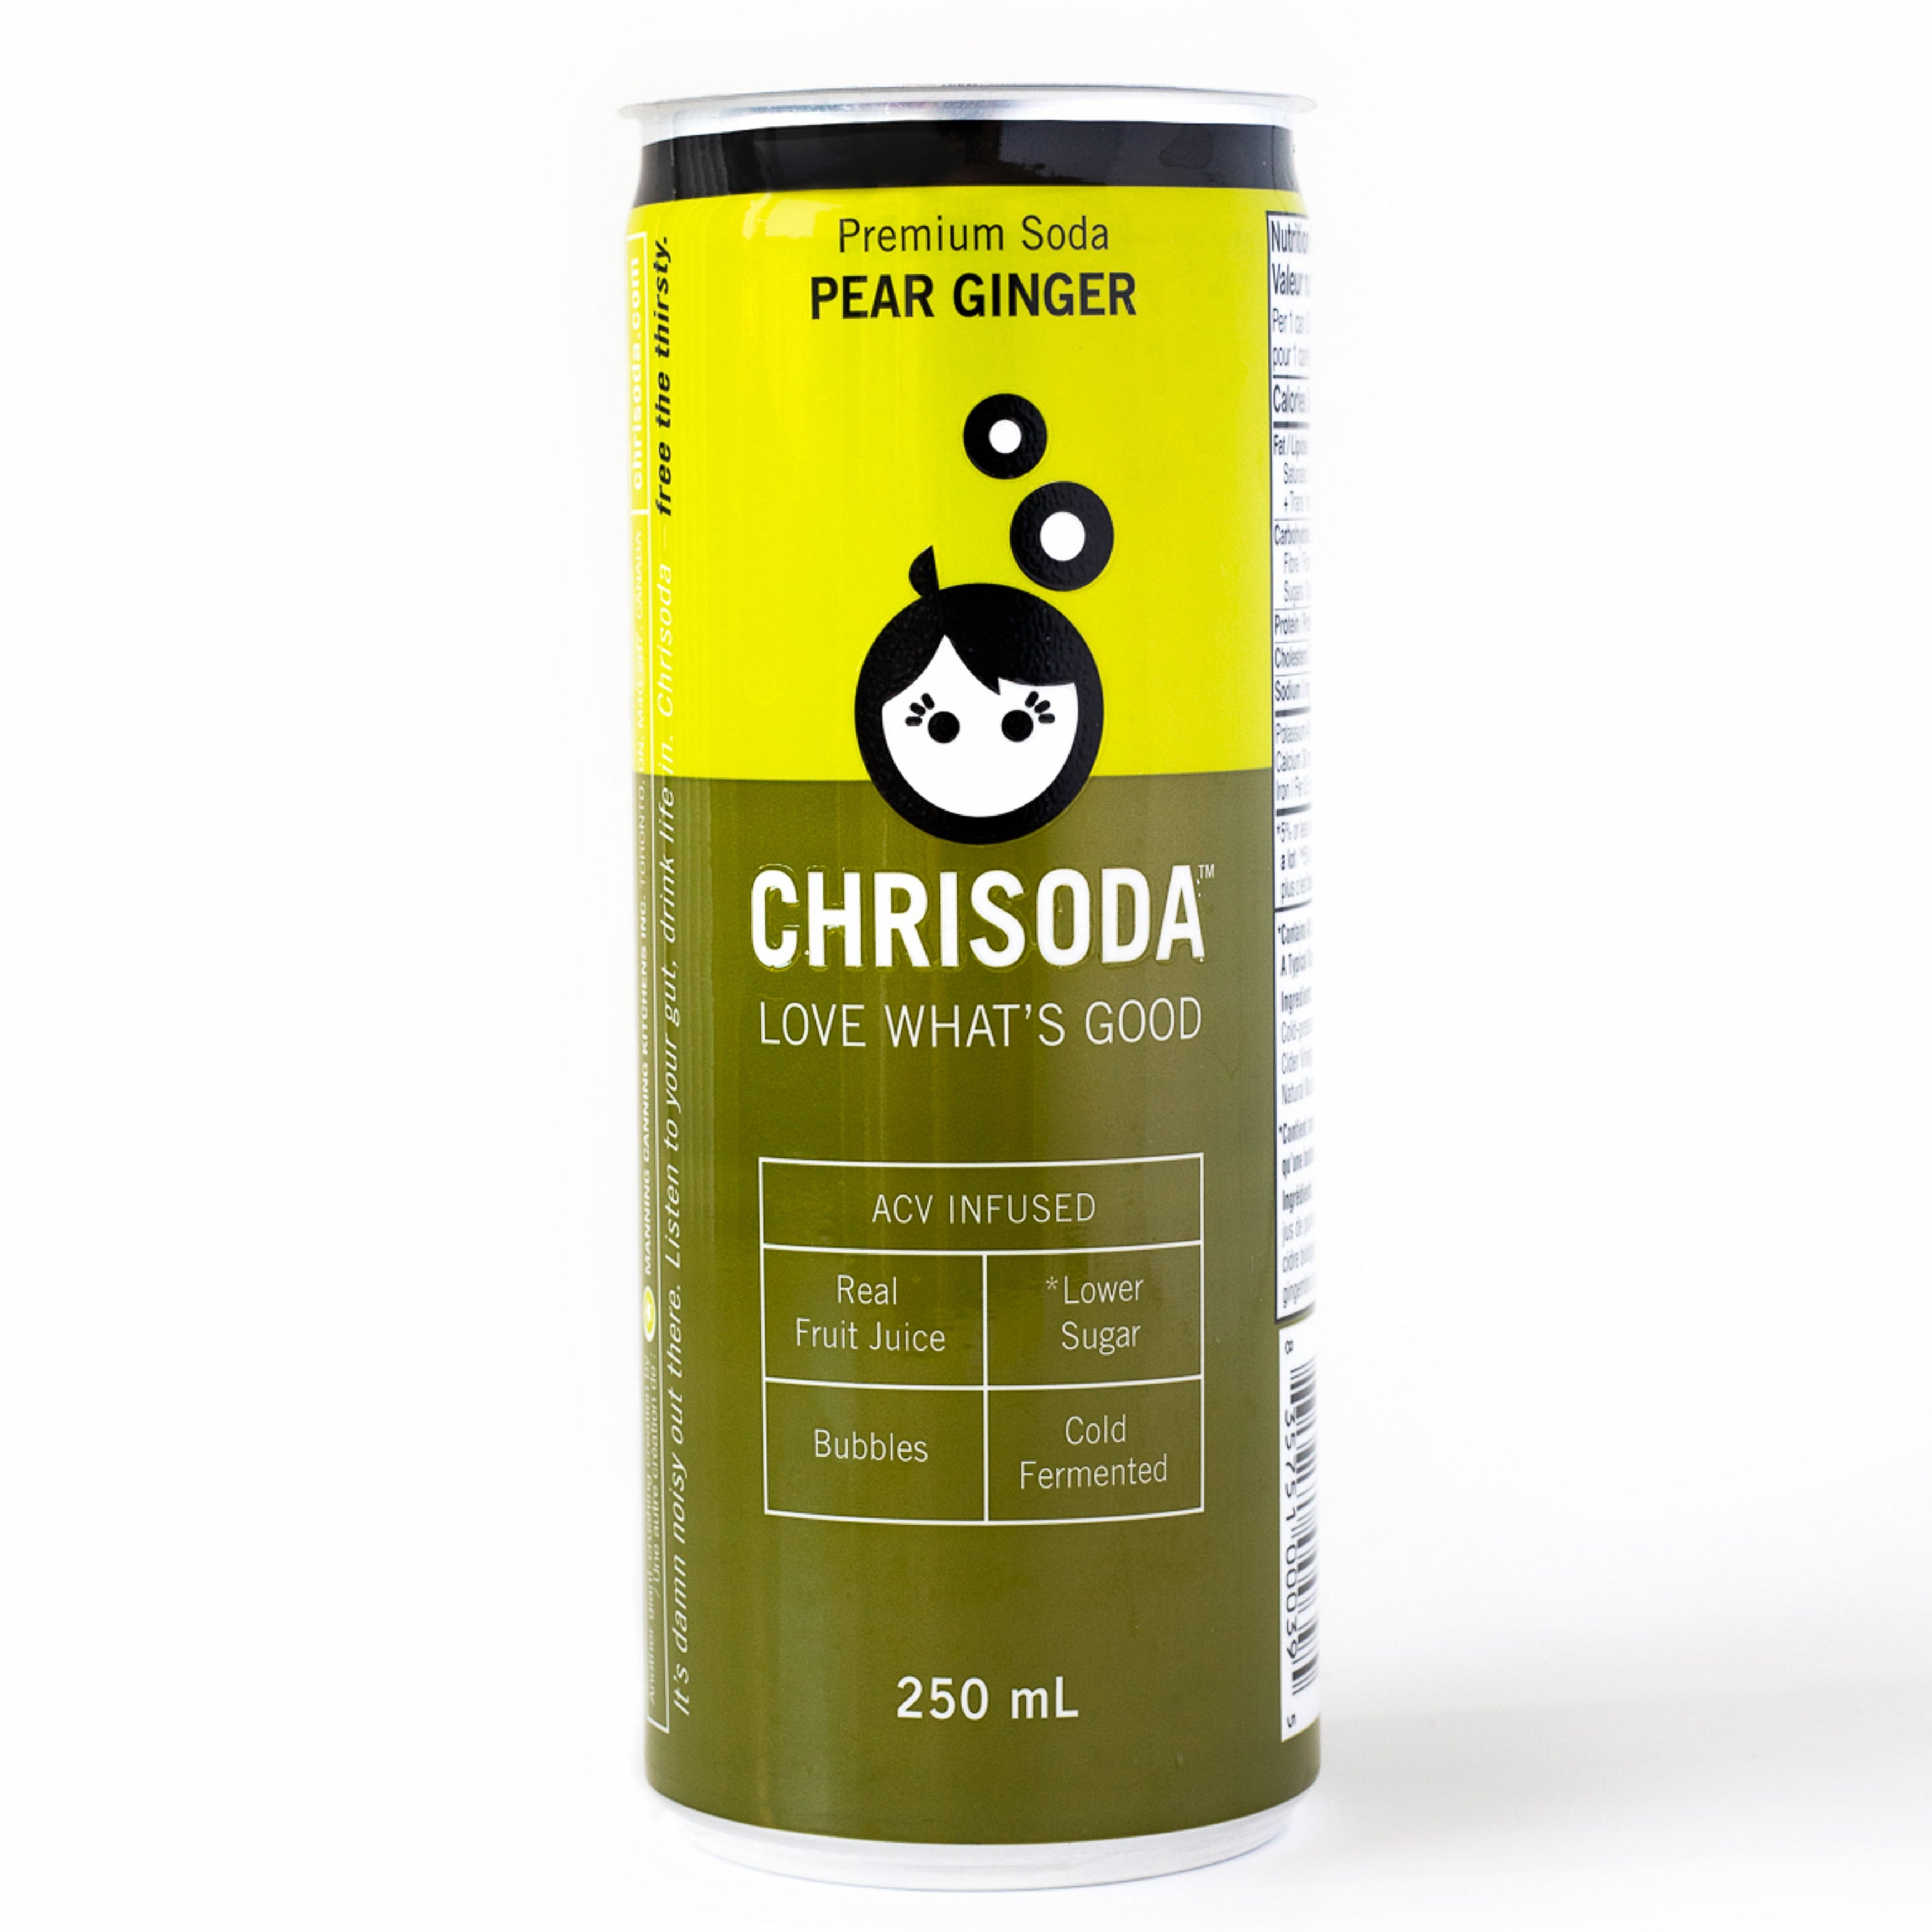 can of pear ginger chrisoda